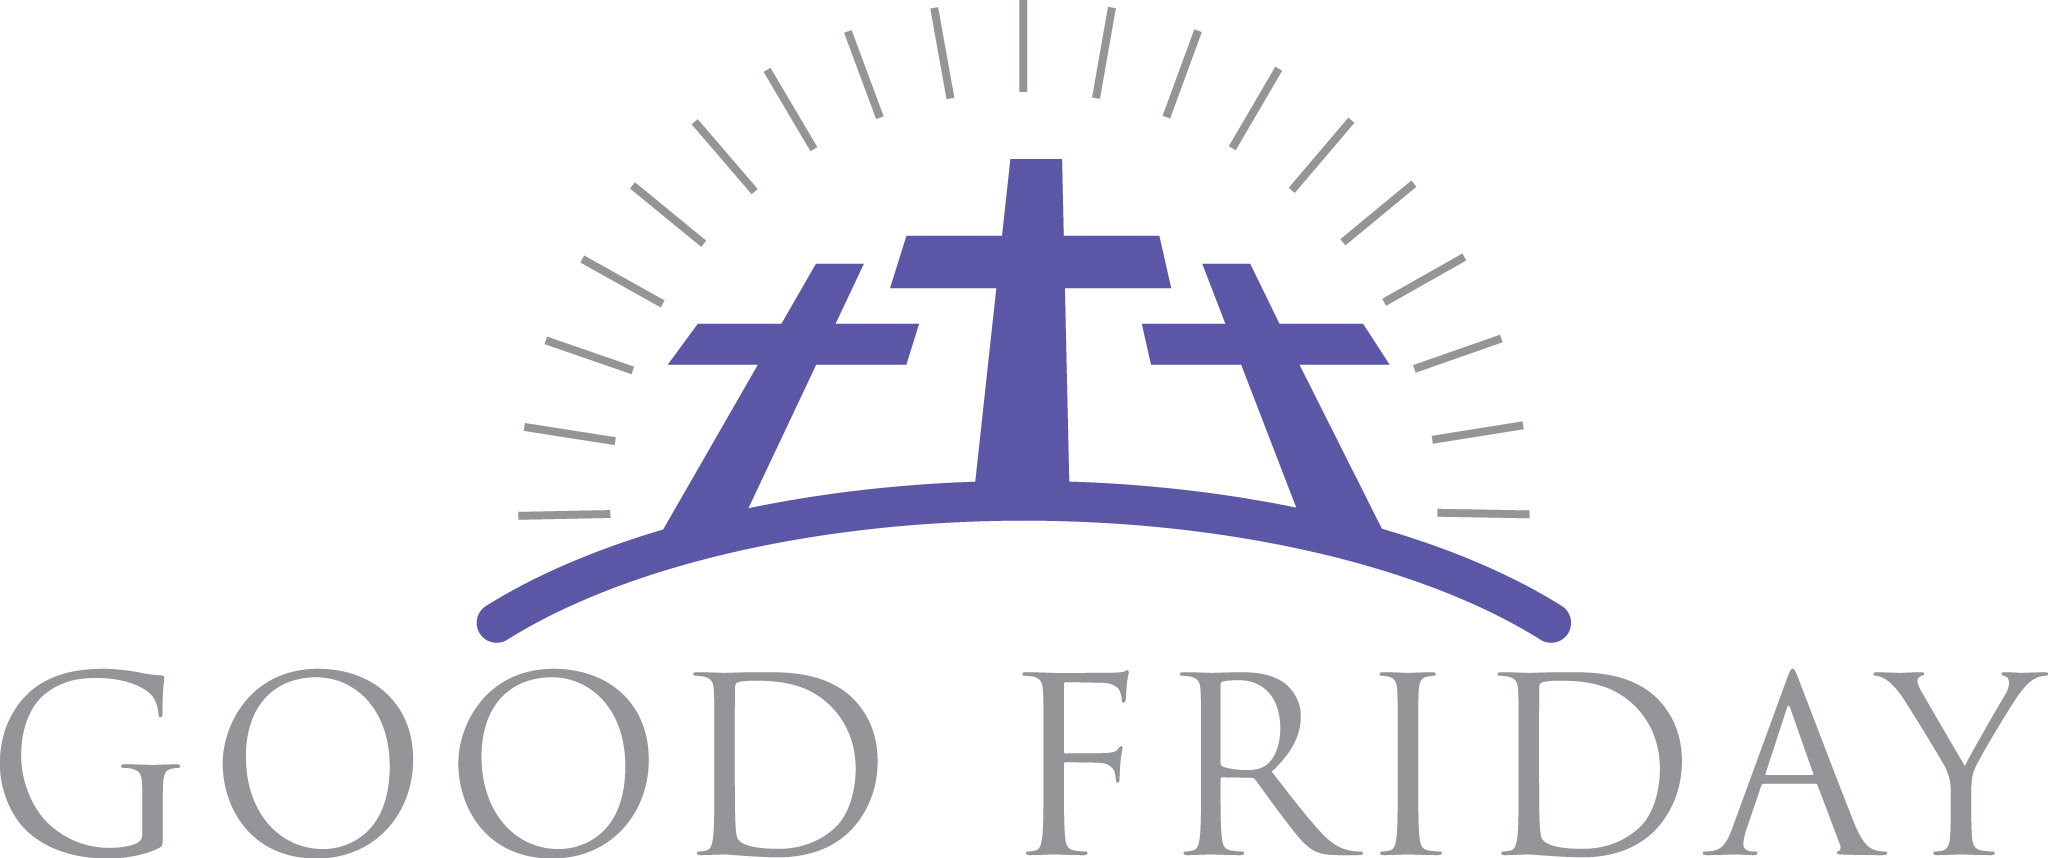 Good Friday Clip Art Pictures - Free Clipart Images